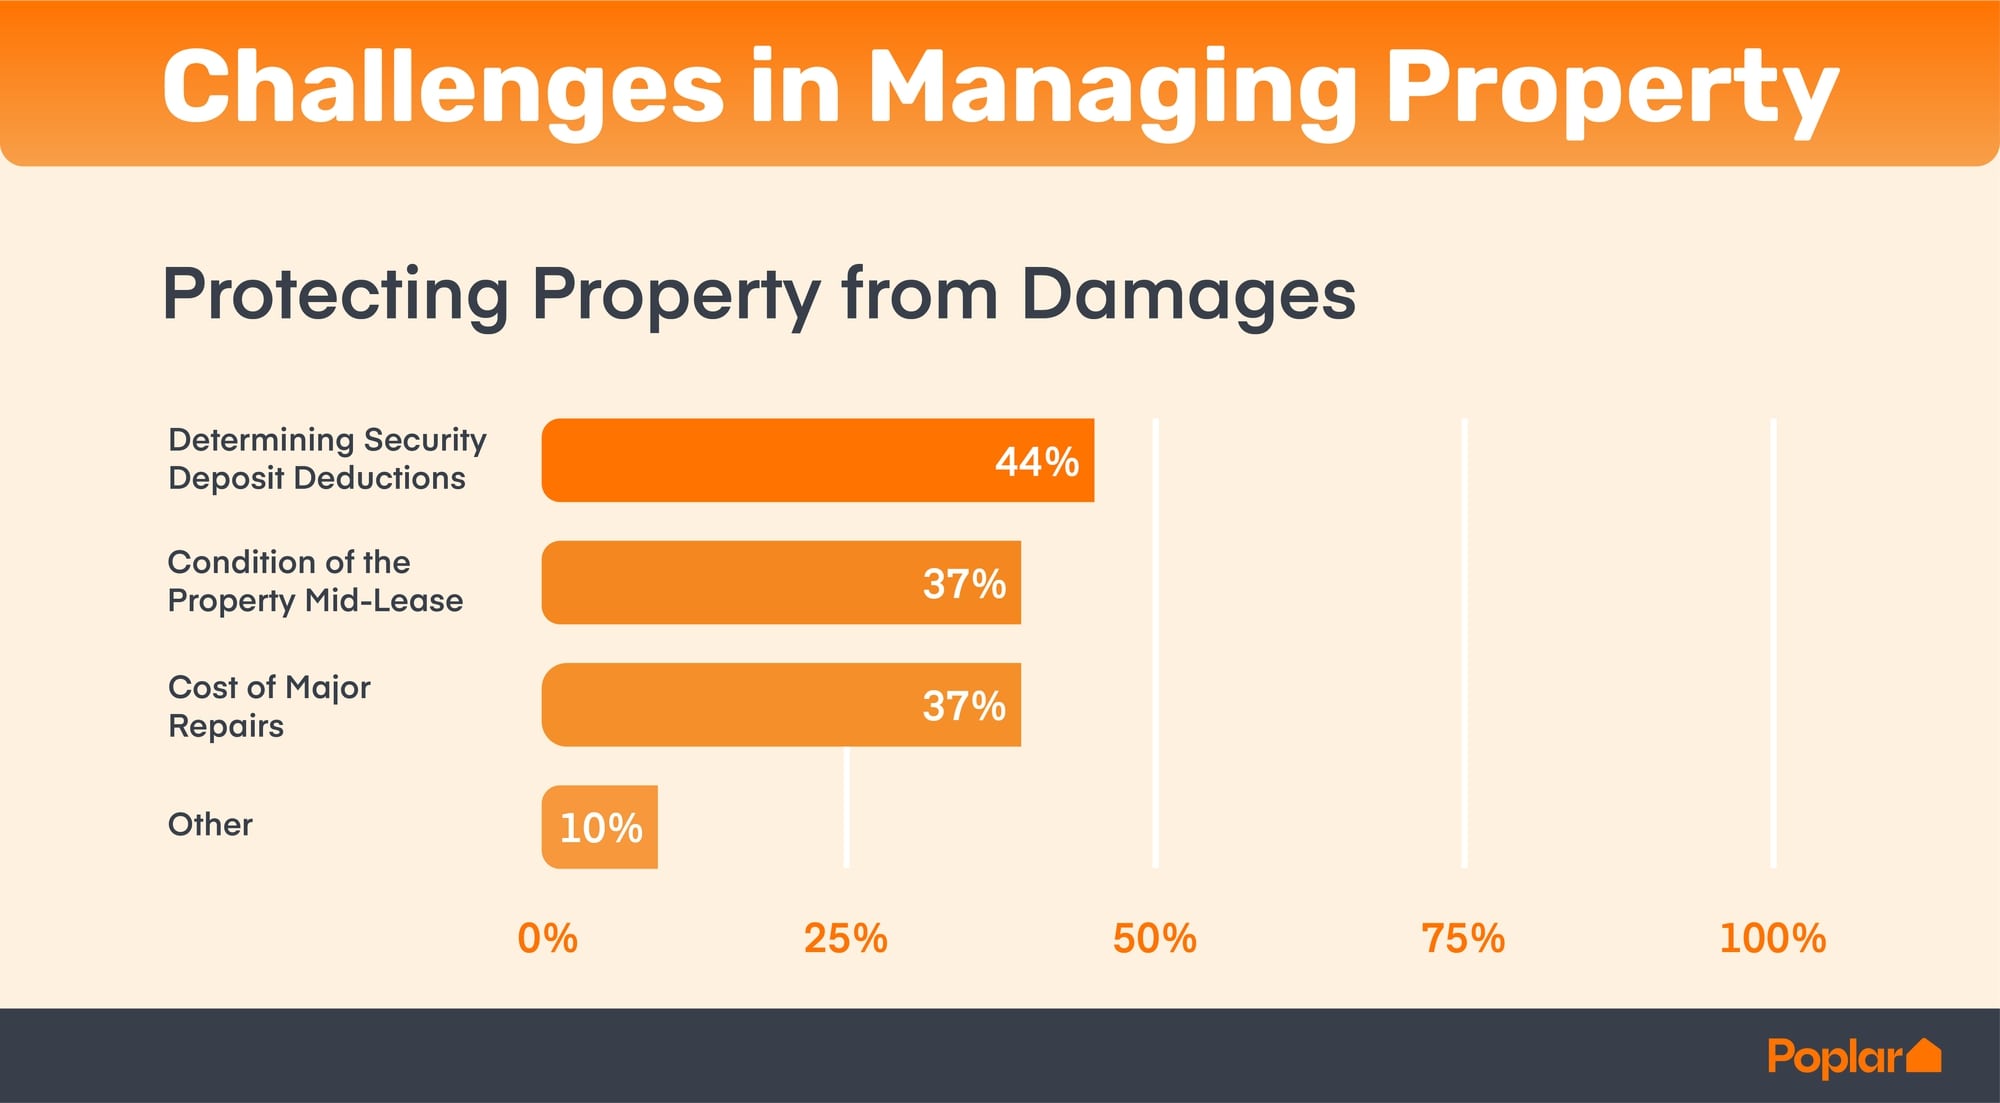 A table showing the challenges in protecting from damages